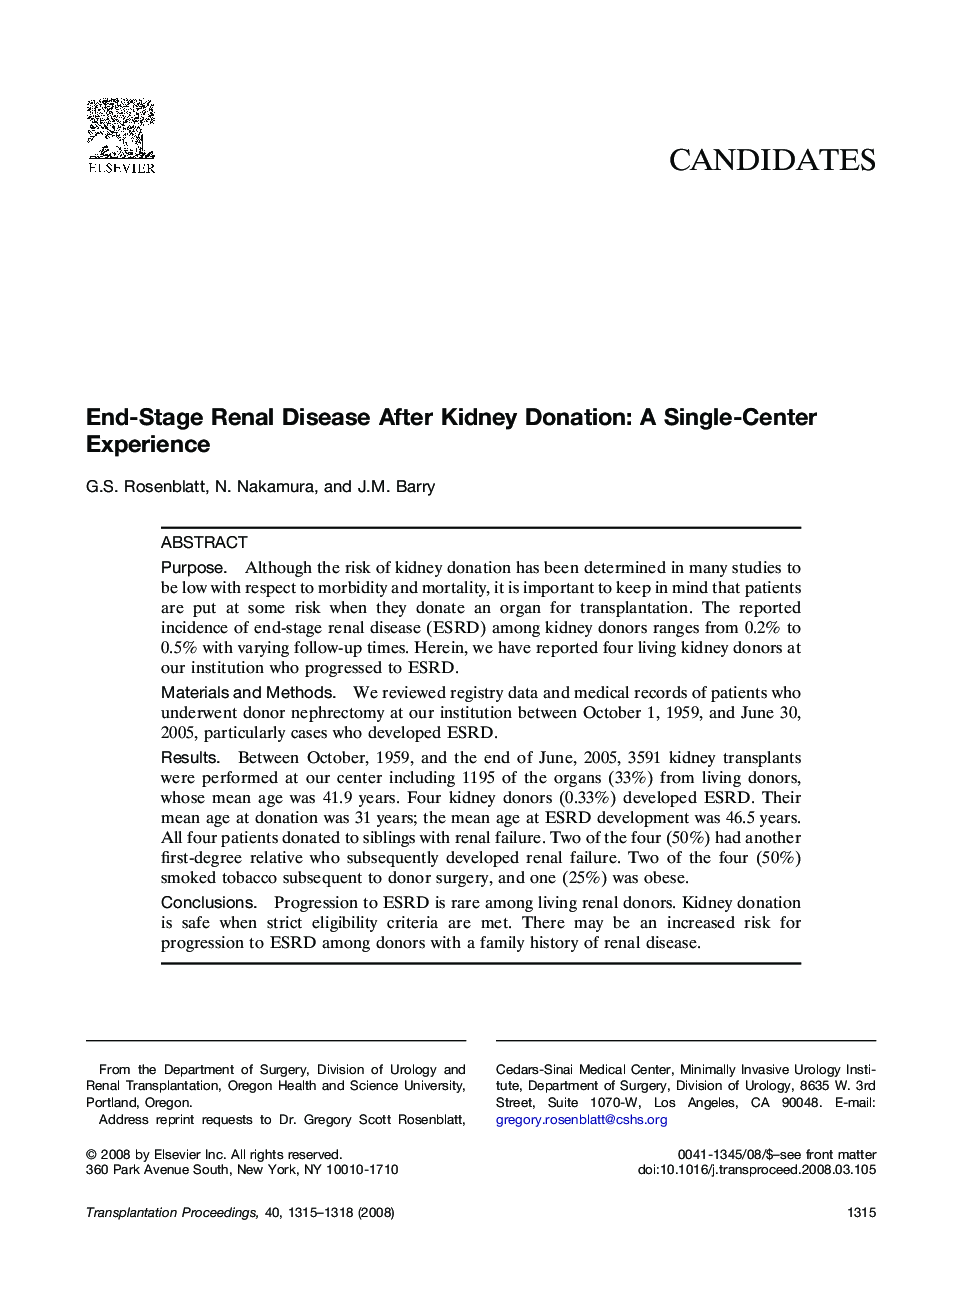 End-Stage Renal Disease After Kidney Donation: A Single-Center Experience